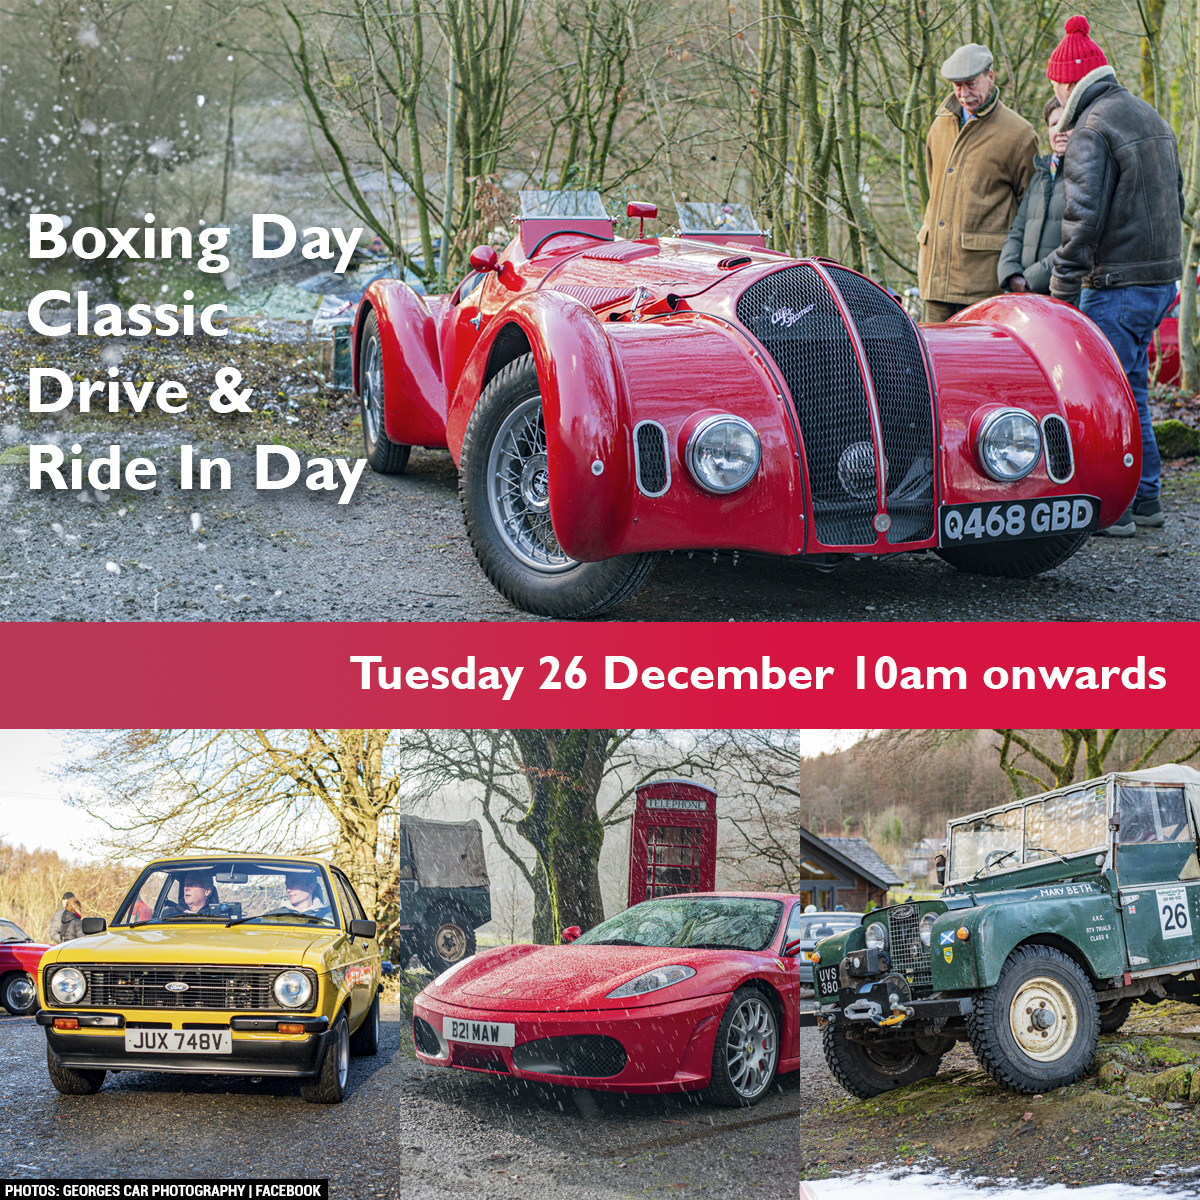 Let it go, let it show, (let it snow?)

Who's joining us this Boxing Day for our festive car meet?

❄️ Full details announced > ow.ly/GX0F50QcYs5

#cumbria #christmasevents  #lakedistrictevents